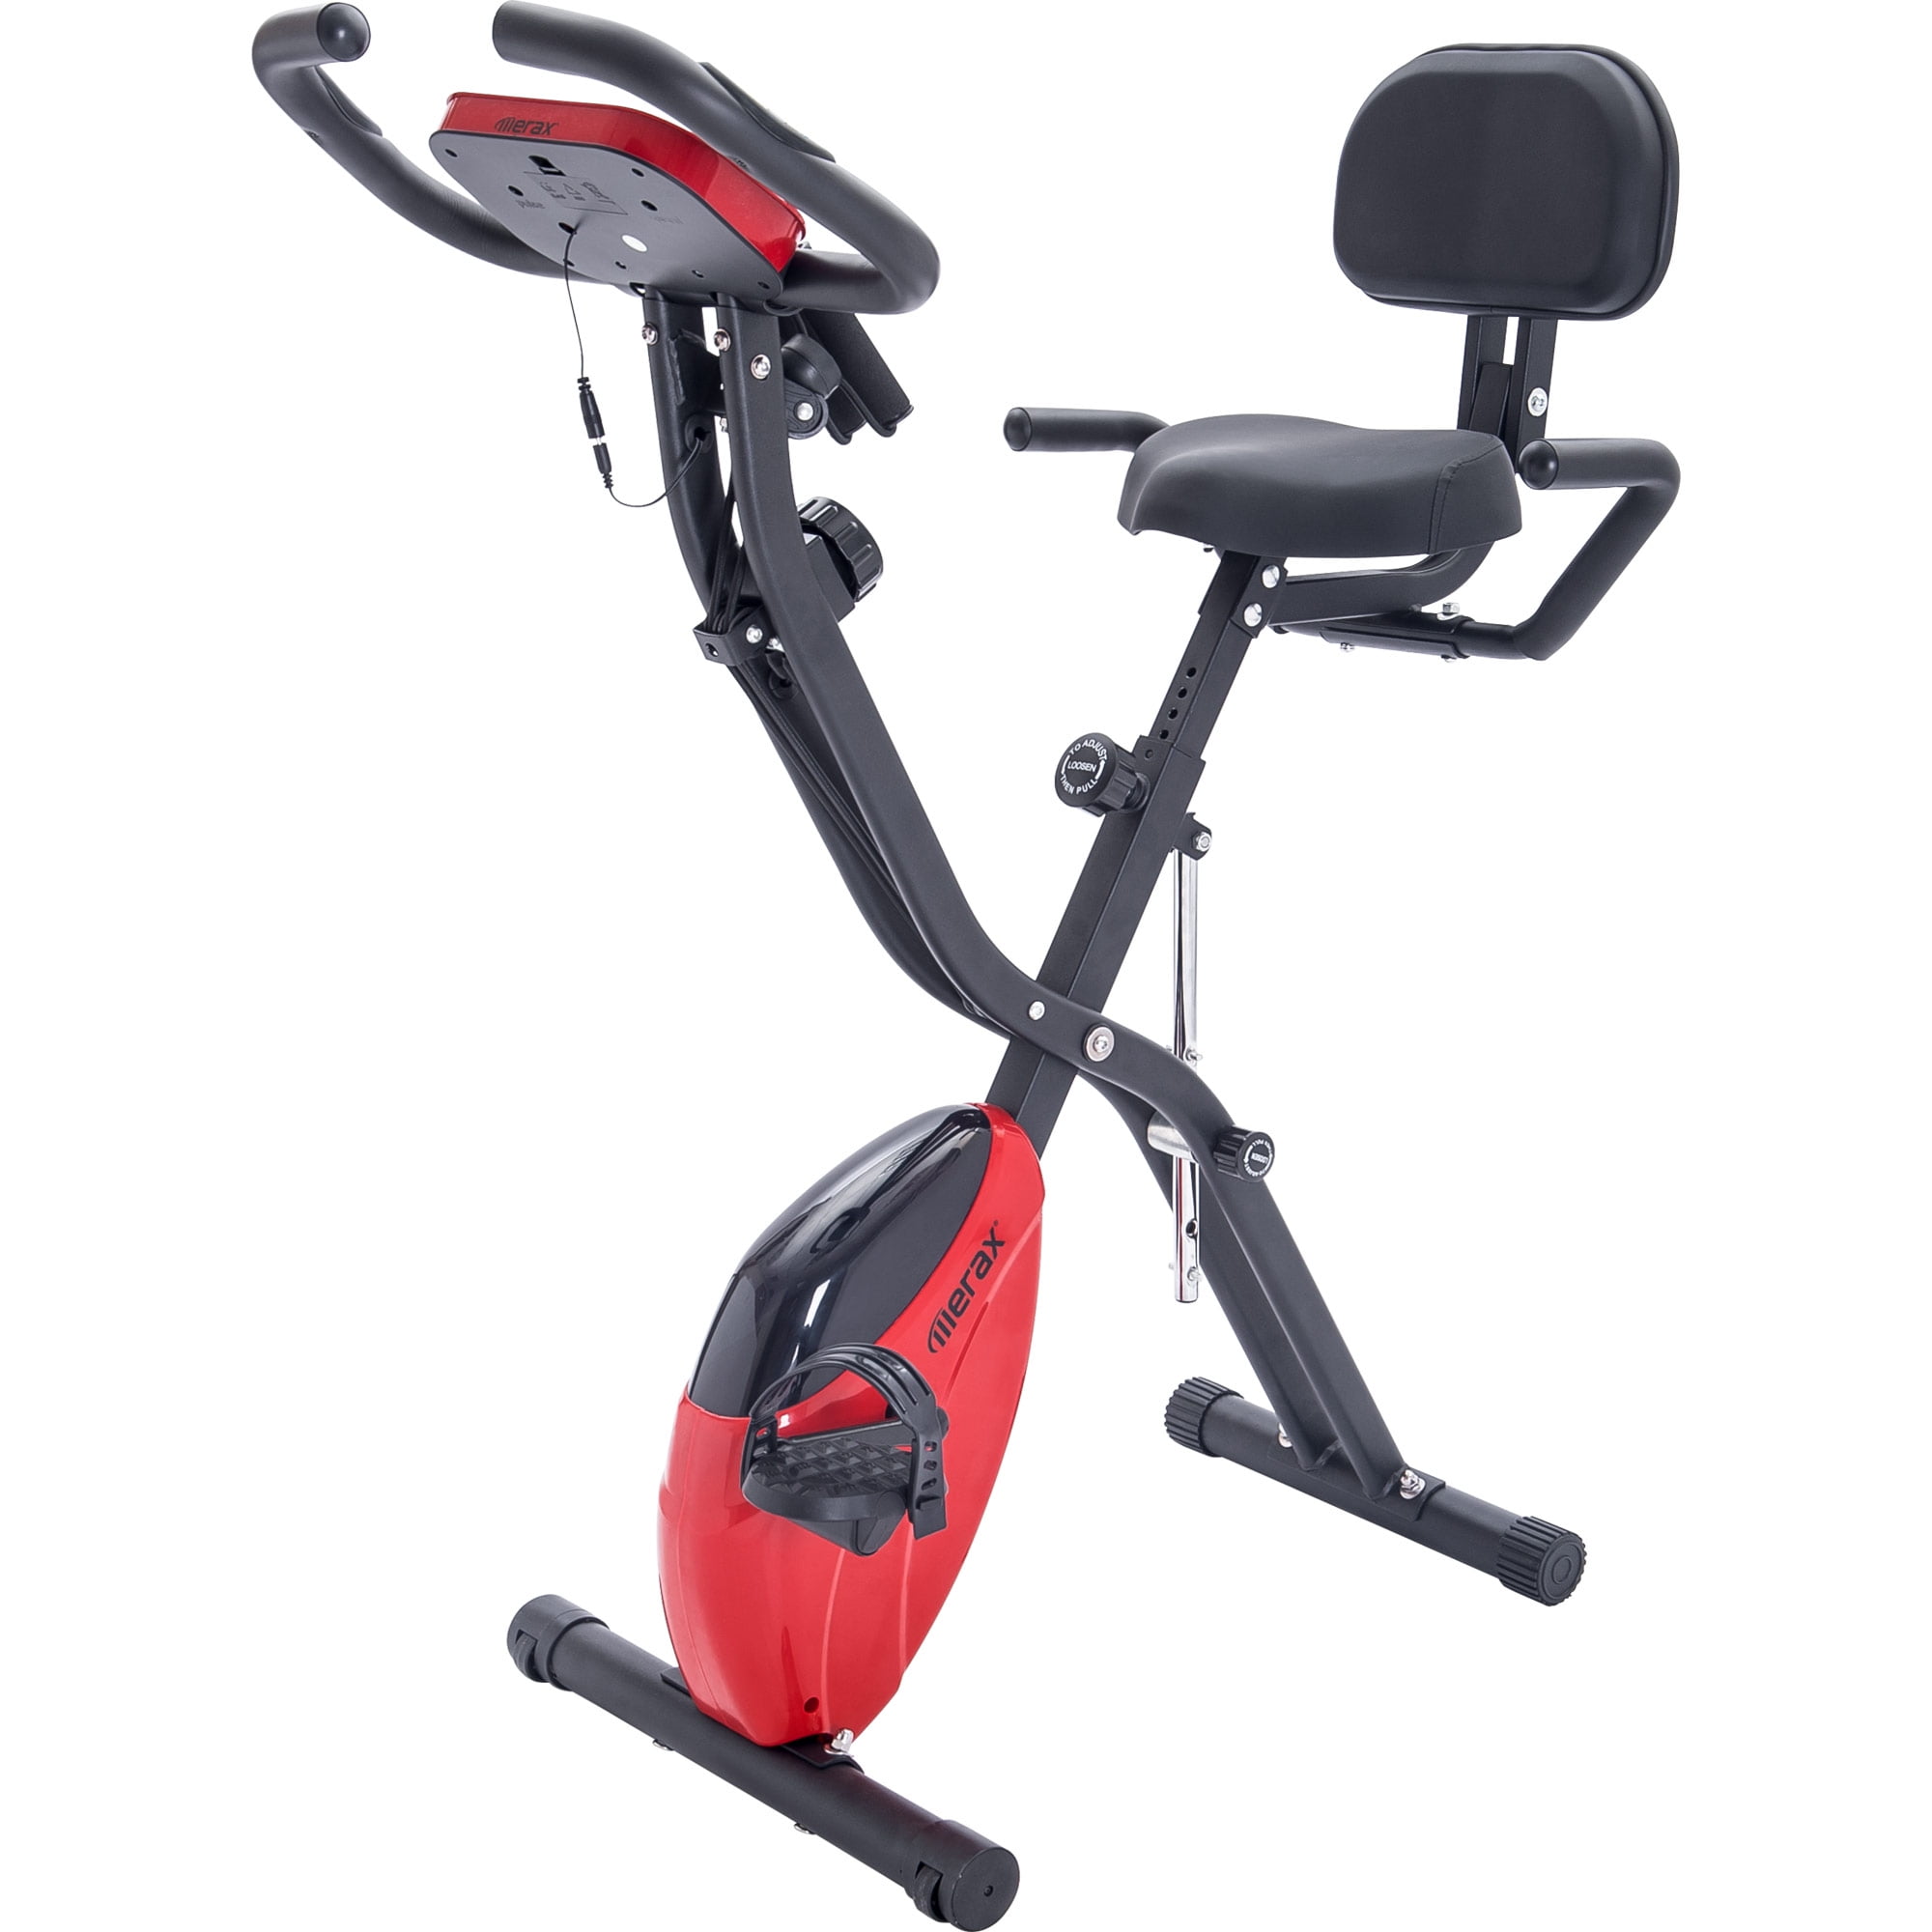 Details about   Exercise Fitness Cross Cycle Upright Bicycle Indoor Workout Home Gym Training 